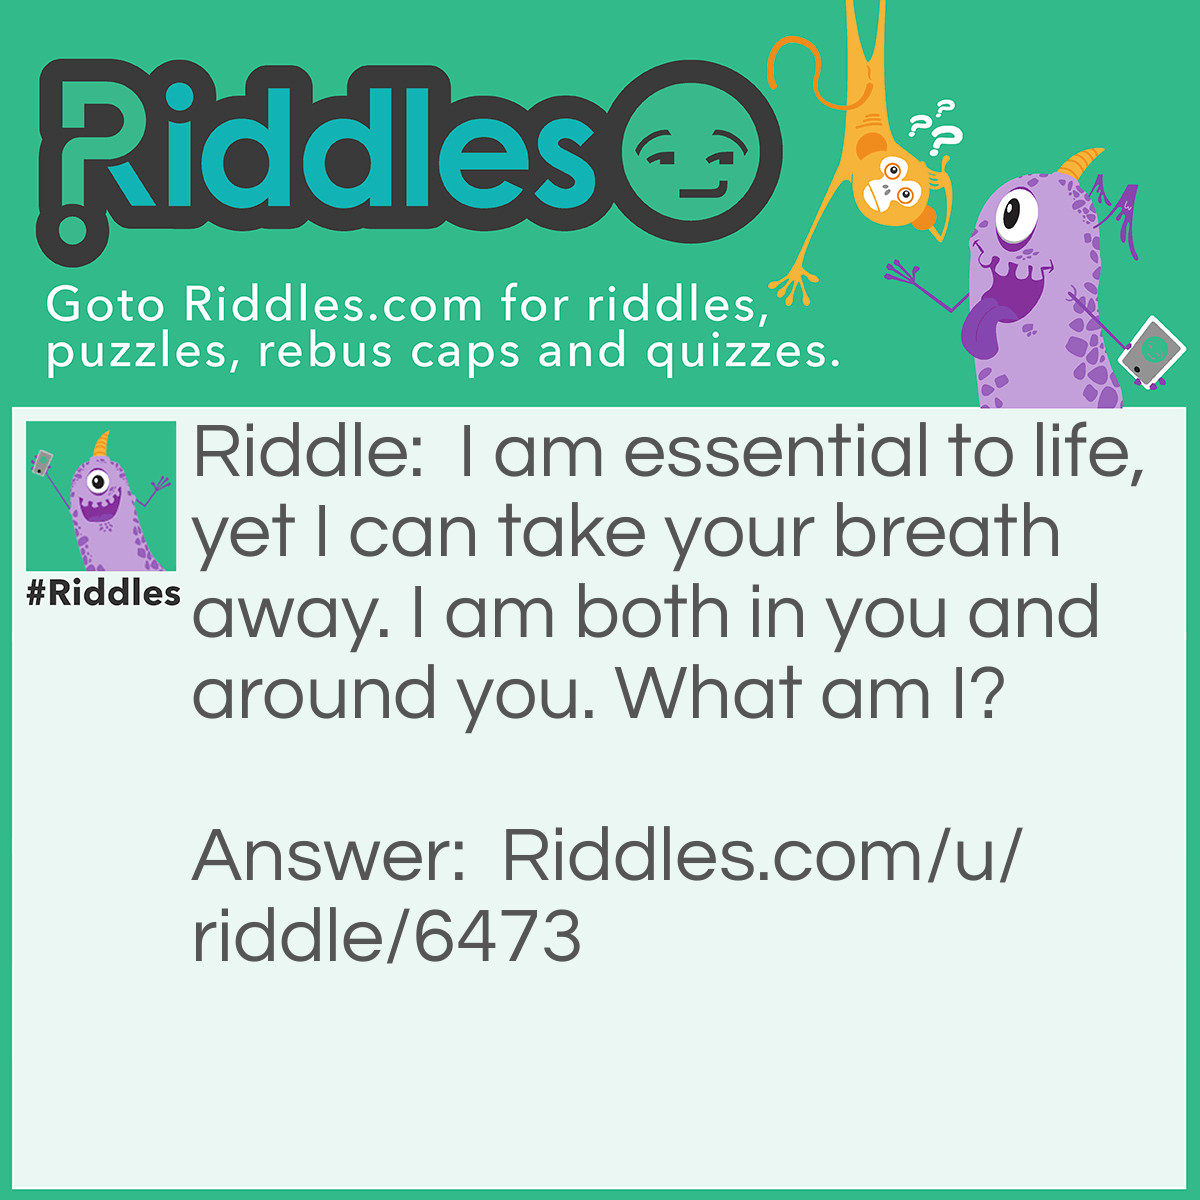 Riddle: I am essential to life, yet I can take your breath away. I am both in you and around you. What am I? Answer: Water.